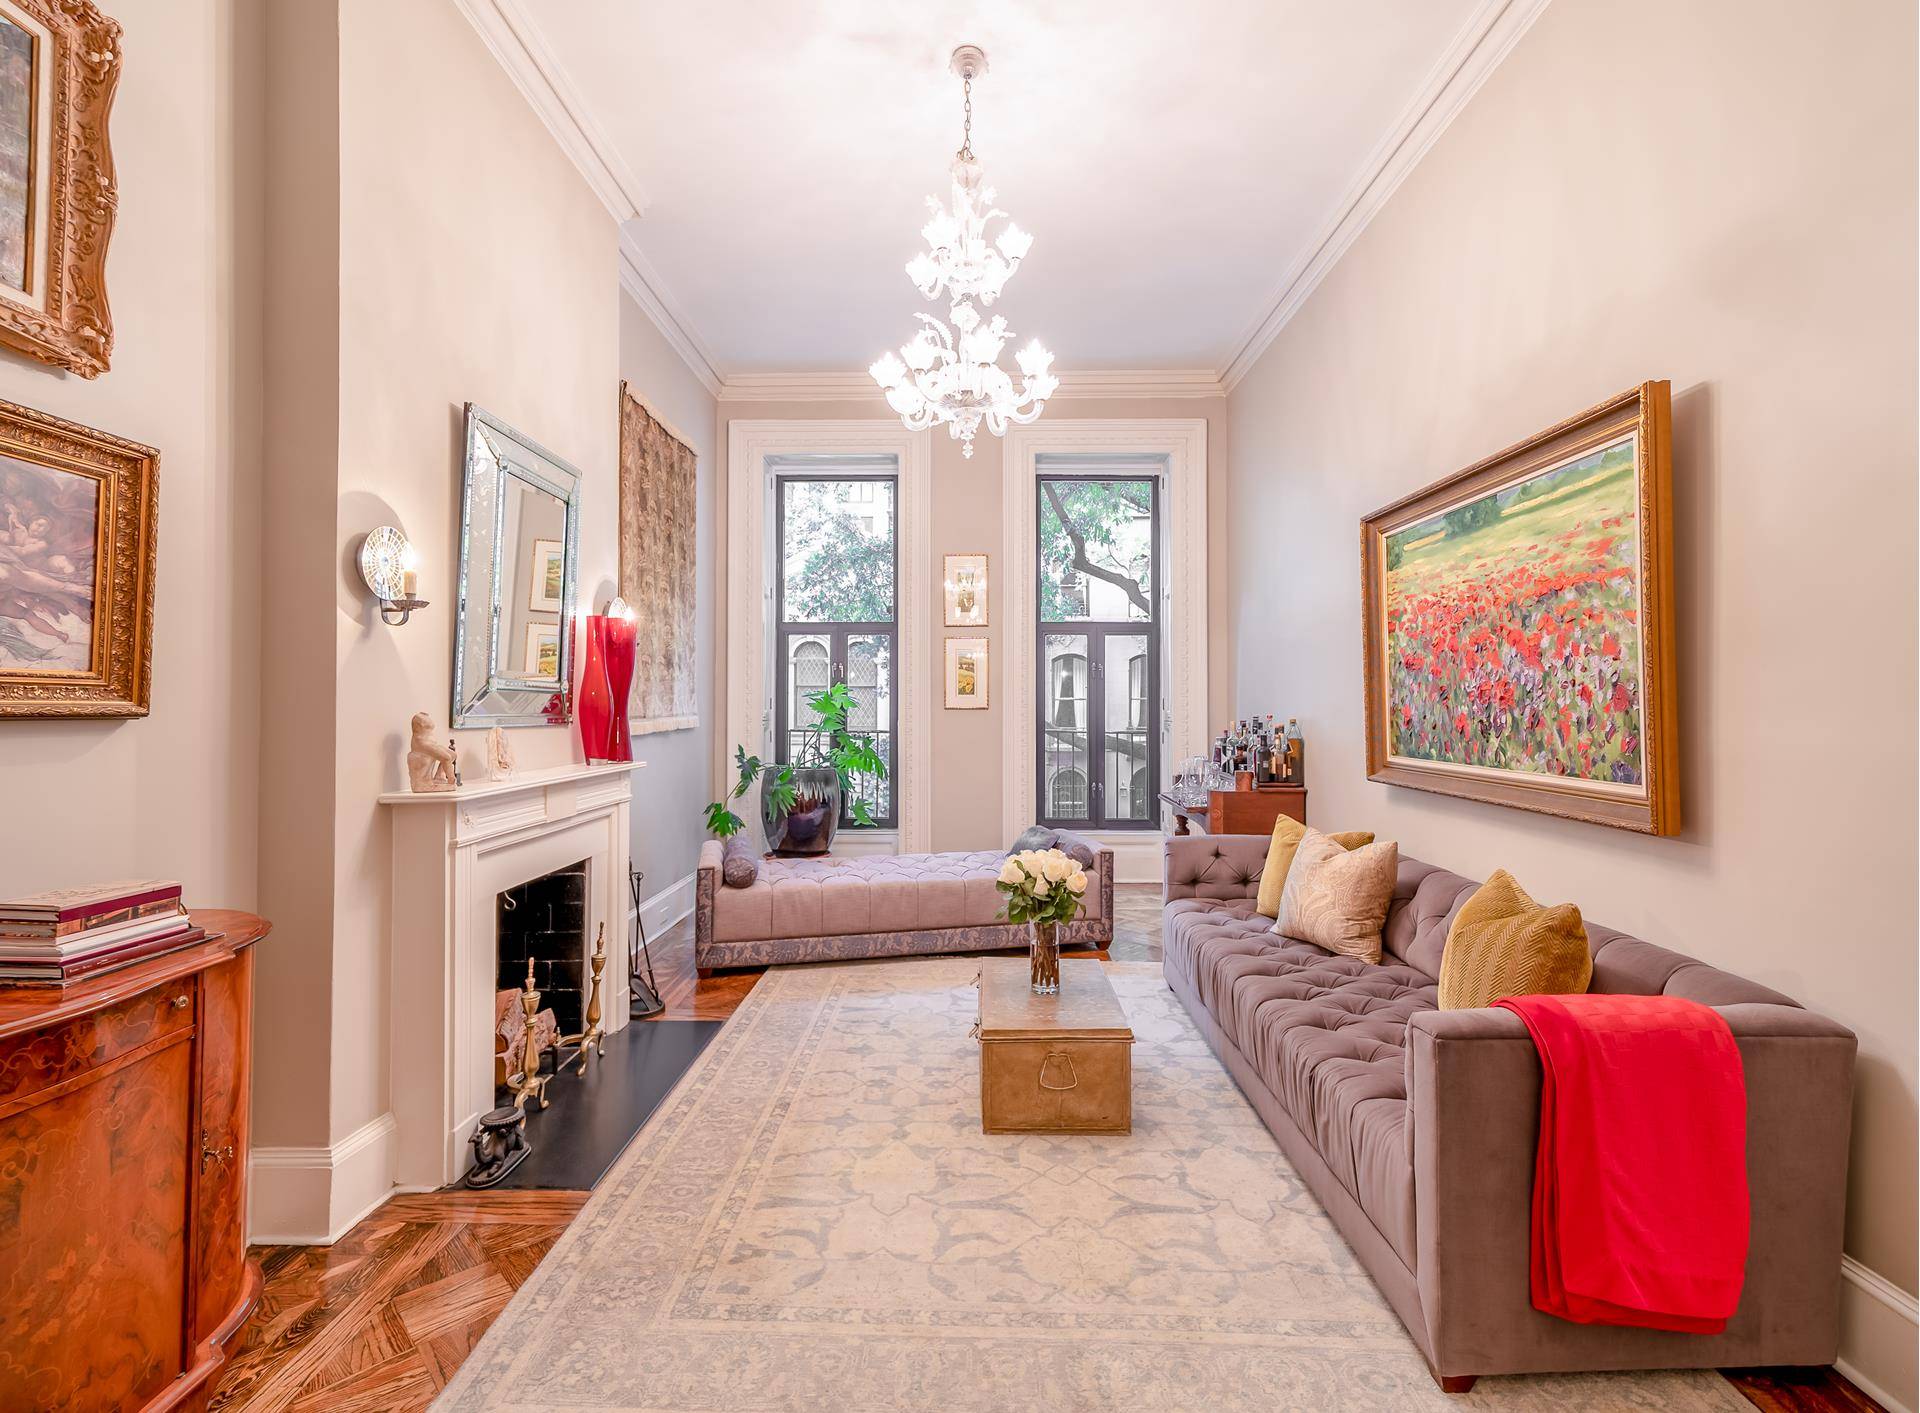 Built in 1857, this five story Anglo Italianate brownstone with approximately 4, 000 square feet above ground plus a full basement is located on the most beautiful tree lined block ...